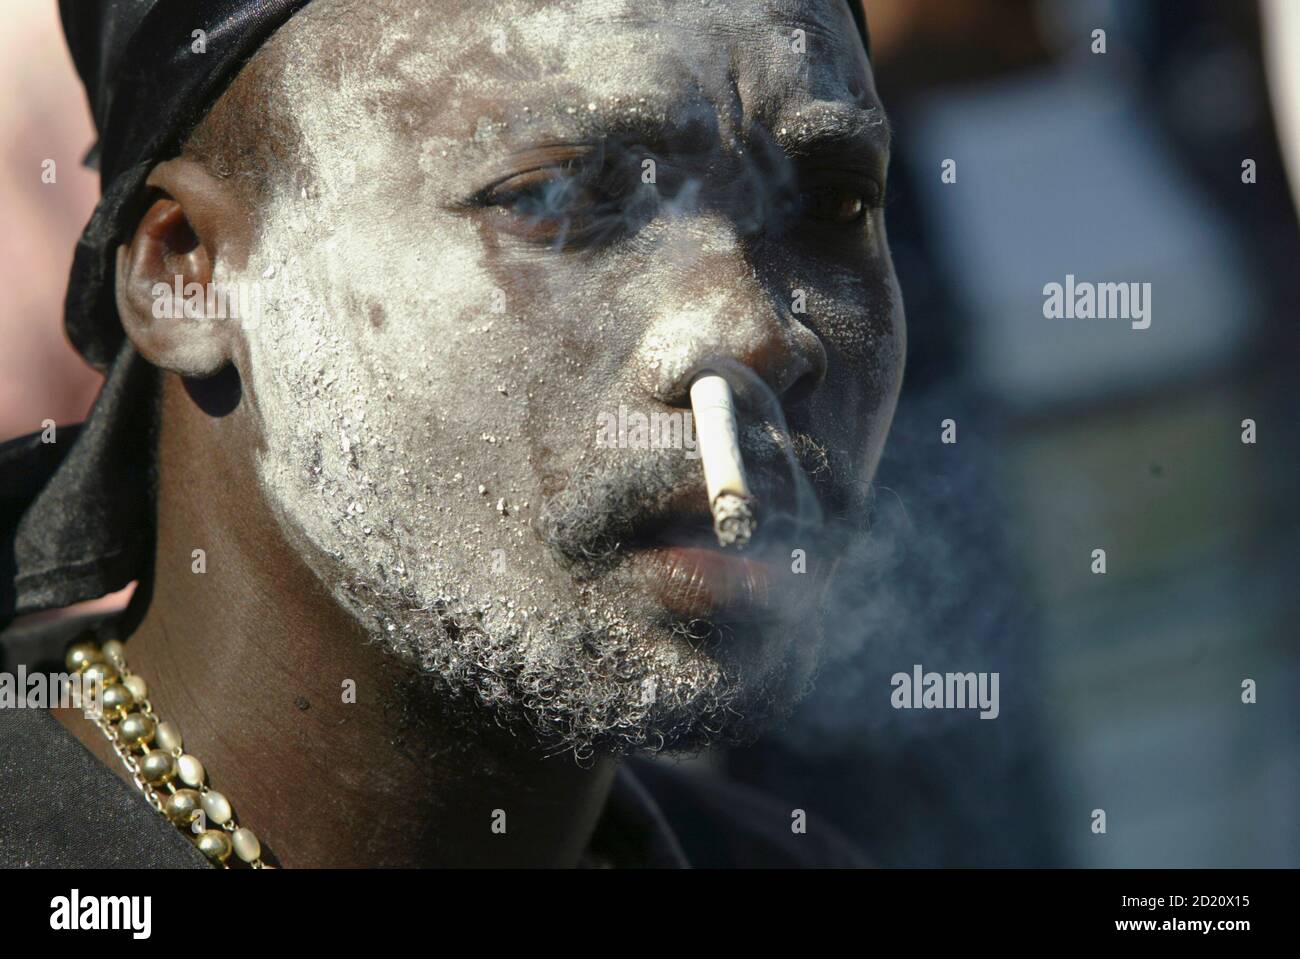 A voodoo believer dressed as 'Gede' the spirit of death smokes a cigarette  through his nose at a cemetery in Port-au-Prince November 2, 2006. Haitians  celebrating All Hallows visit cemeteries to pay